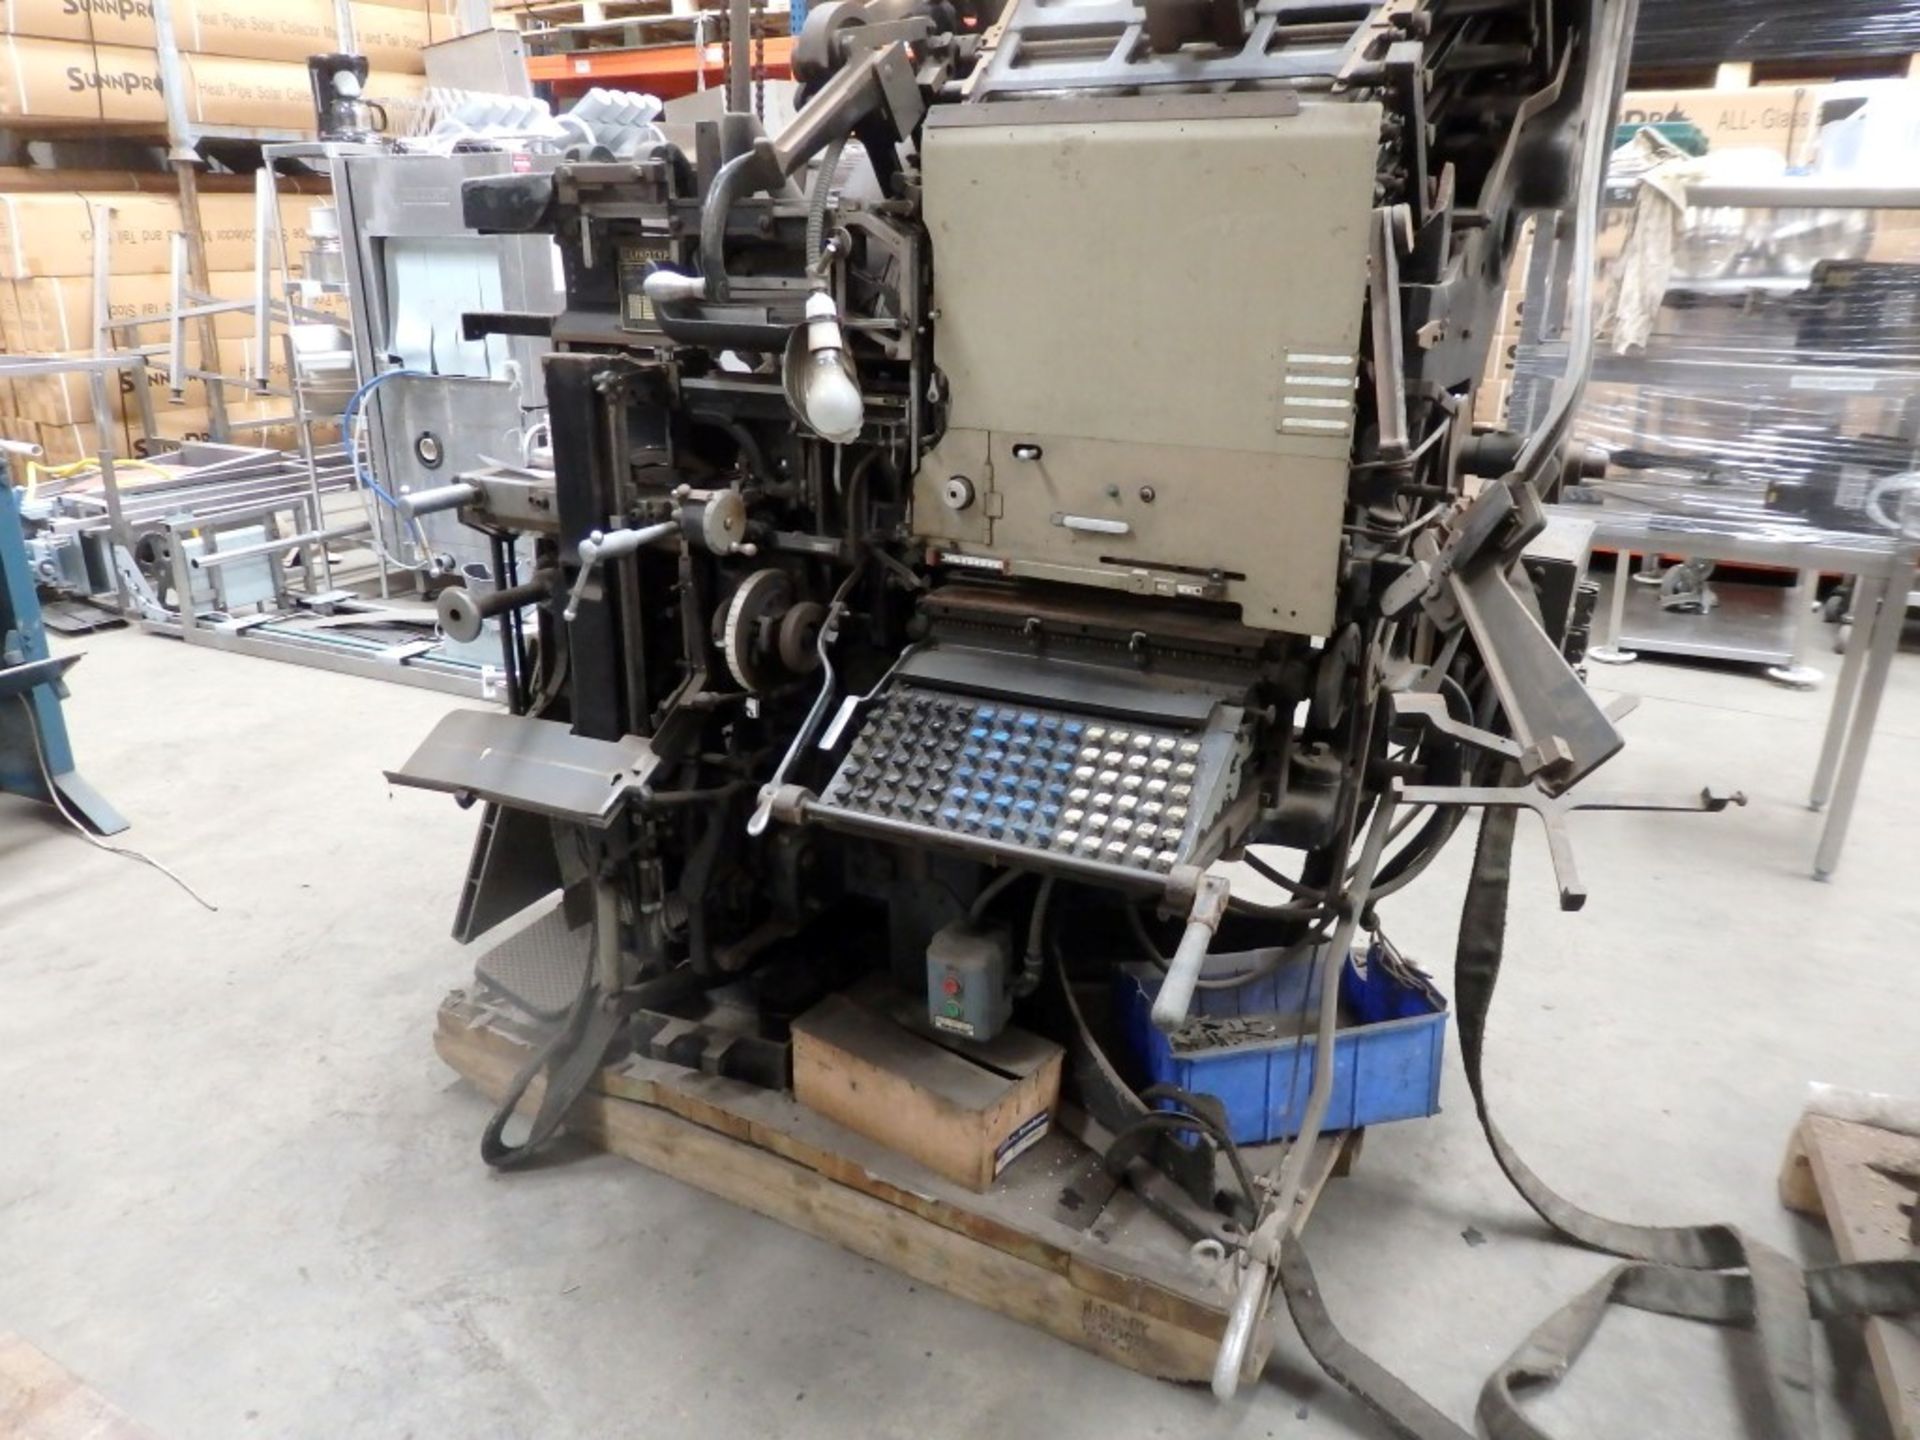 1 x Original Linotype Model 78 Printing Press - Untested In Good Aesthetic Condition - Fantastic - Image 15 of 23